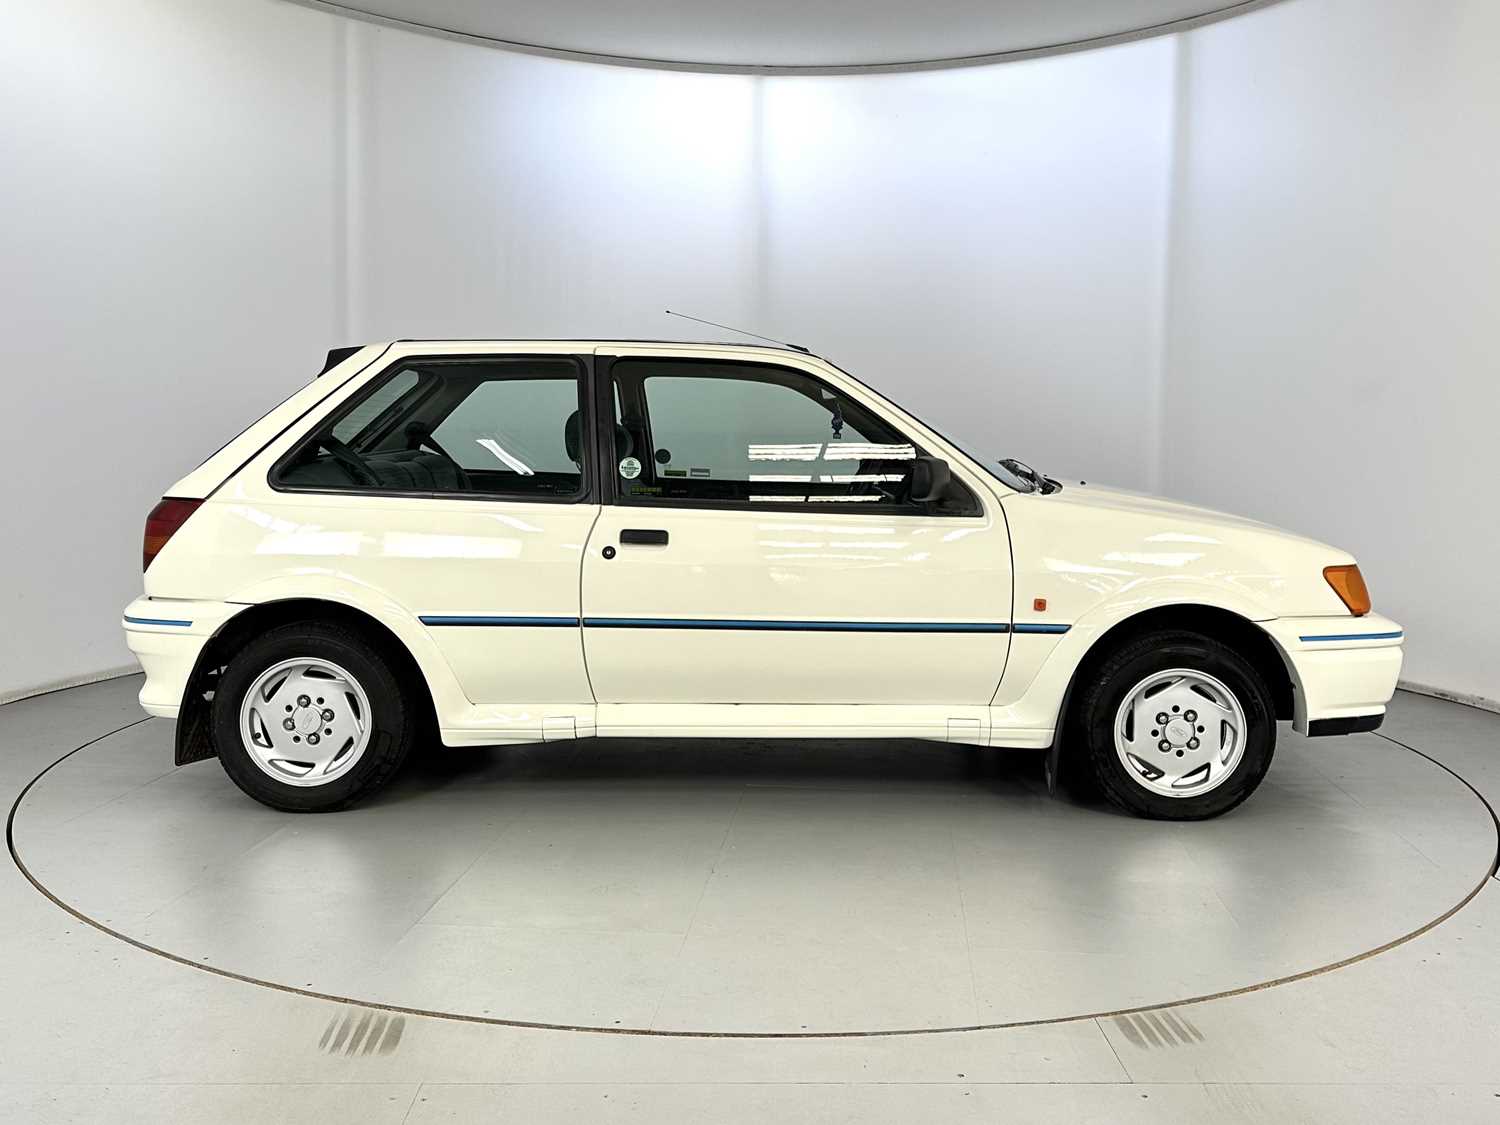 1991 Ford Fiesta XR2i - Image 11 of 30